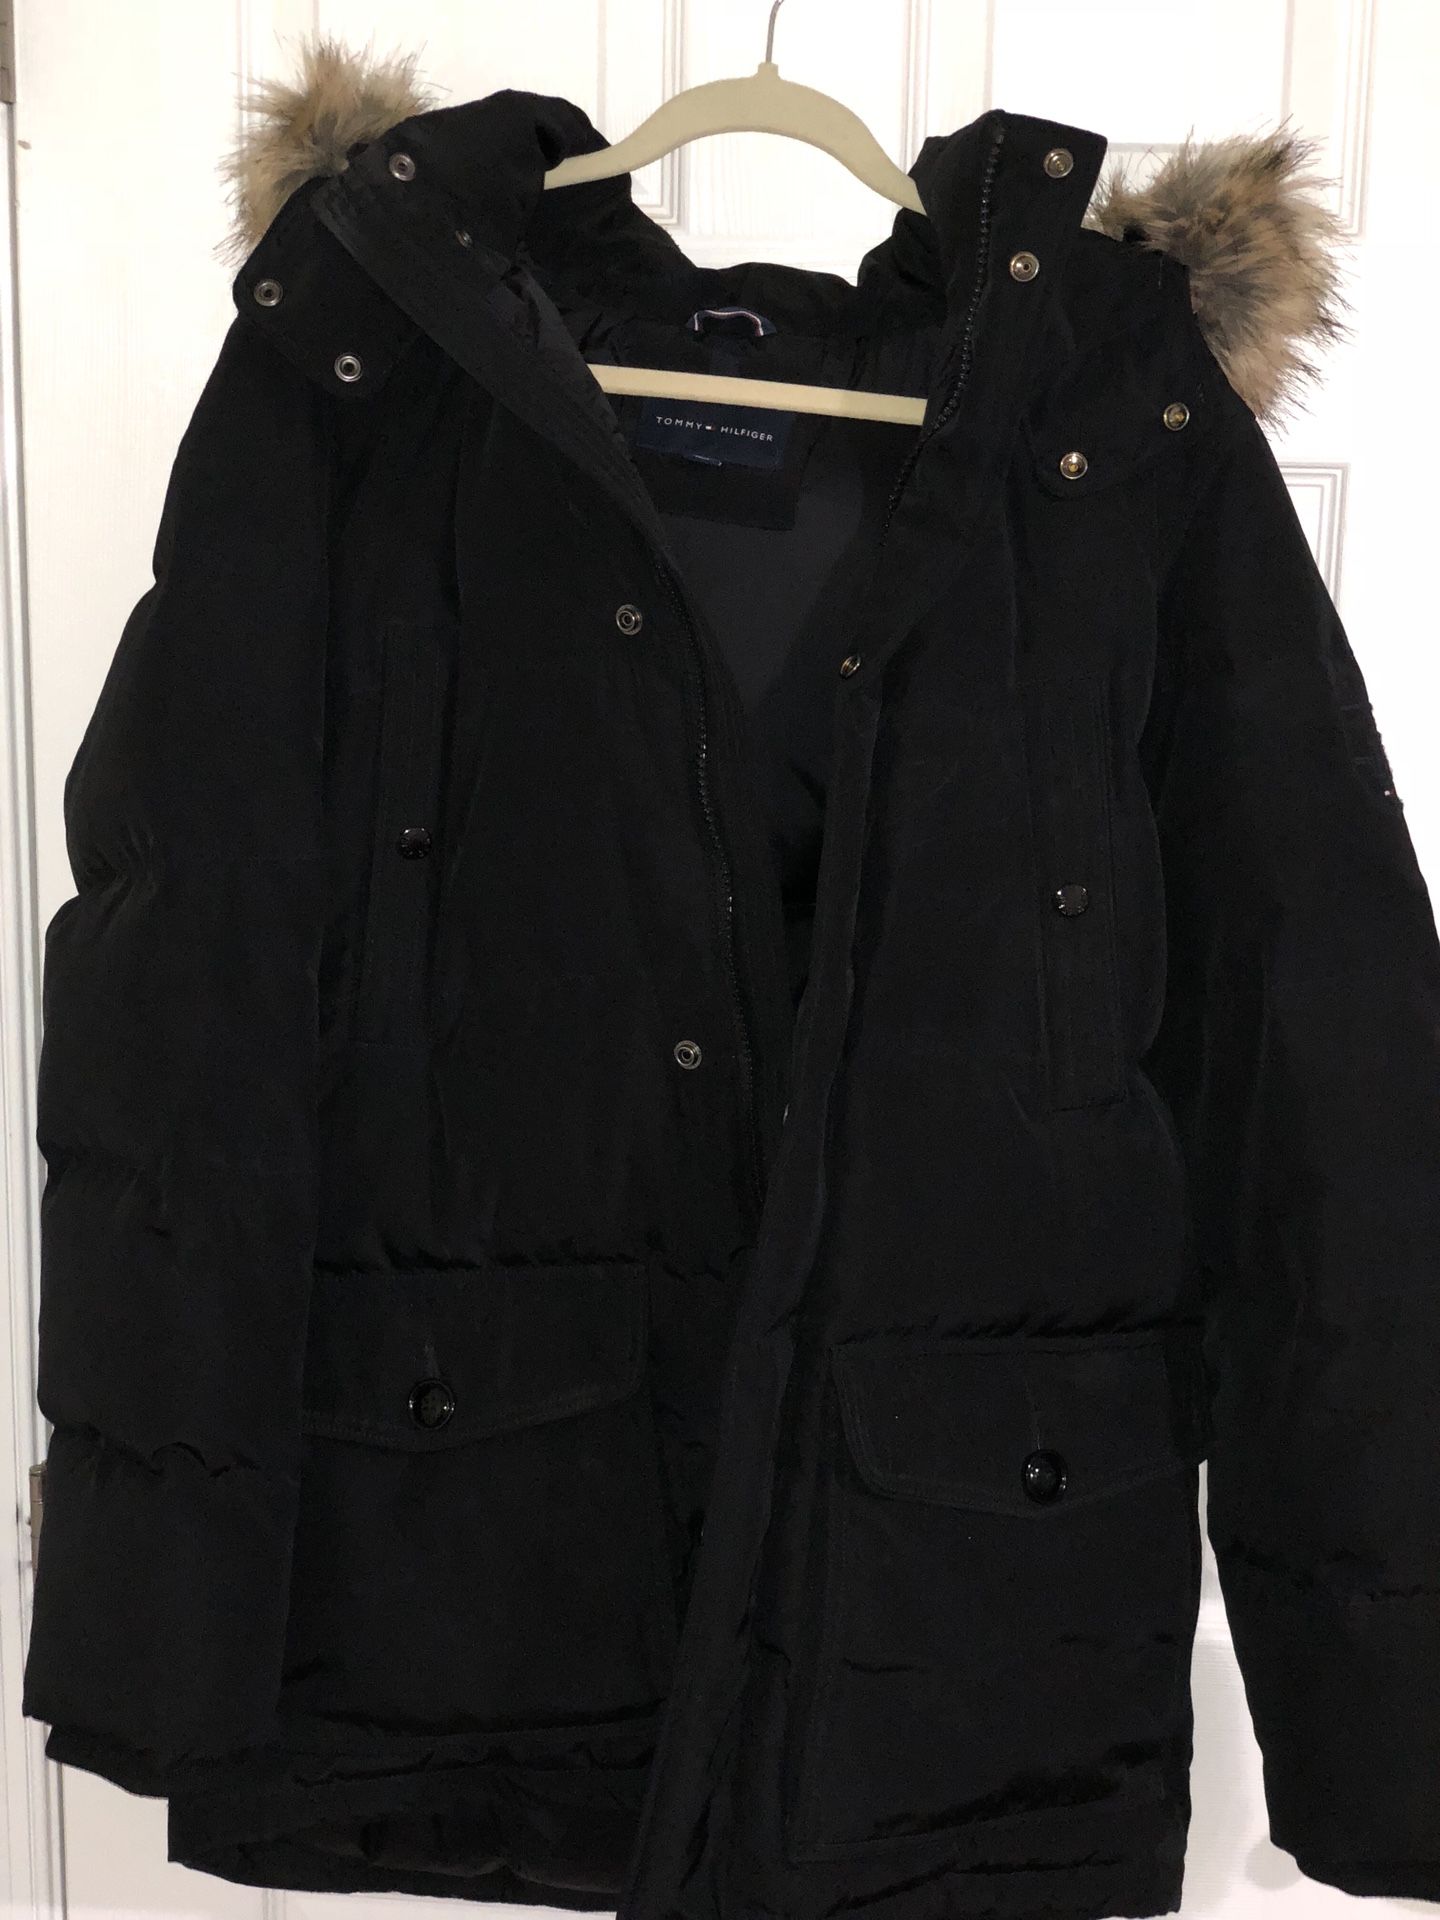 Tommy Trench coat size L